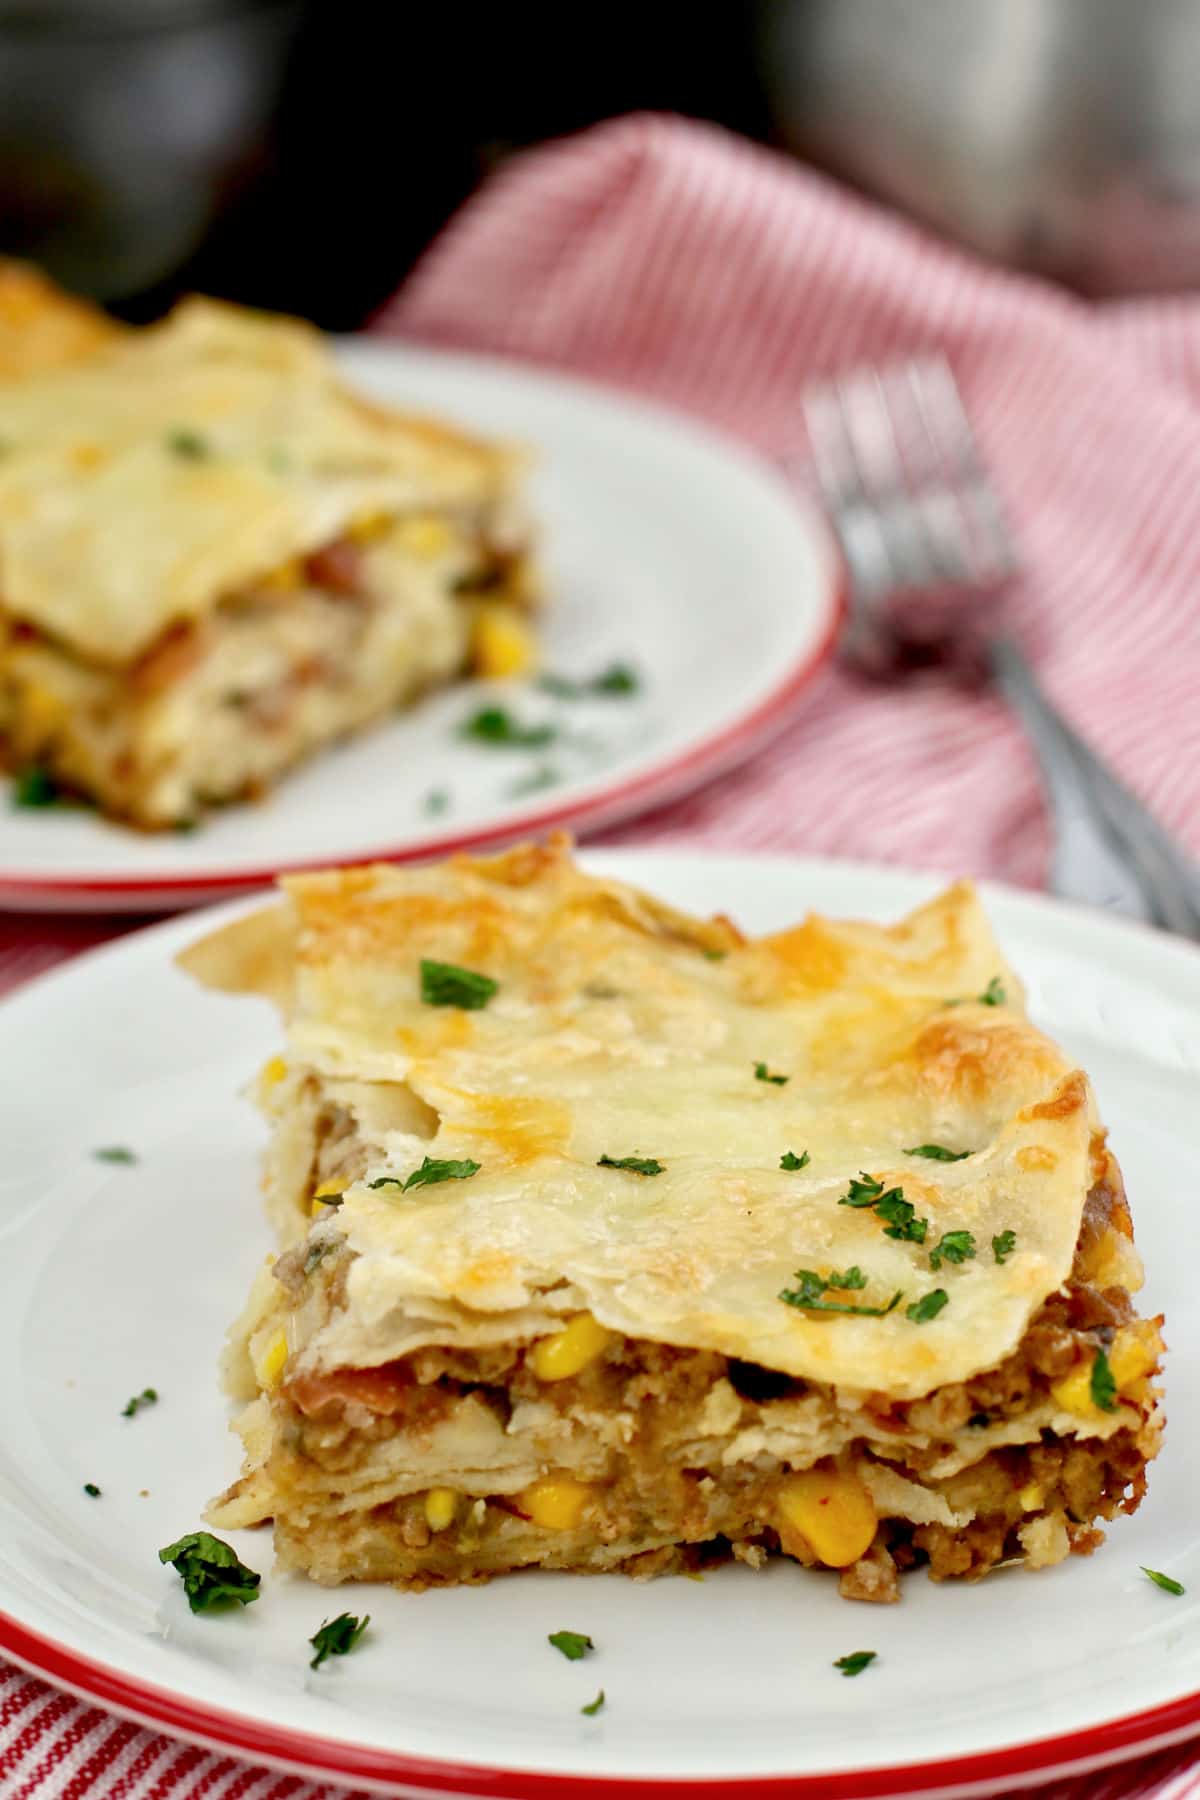 Mexican Chicken Lasagna servings on plates.